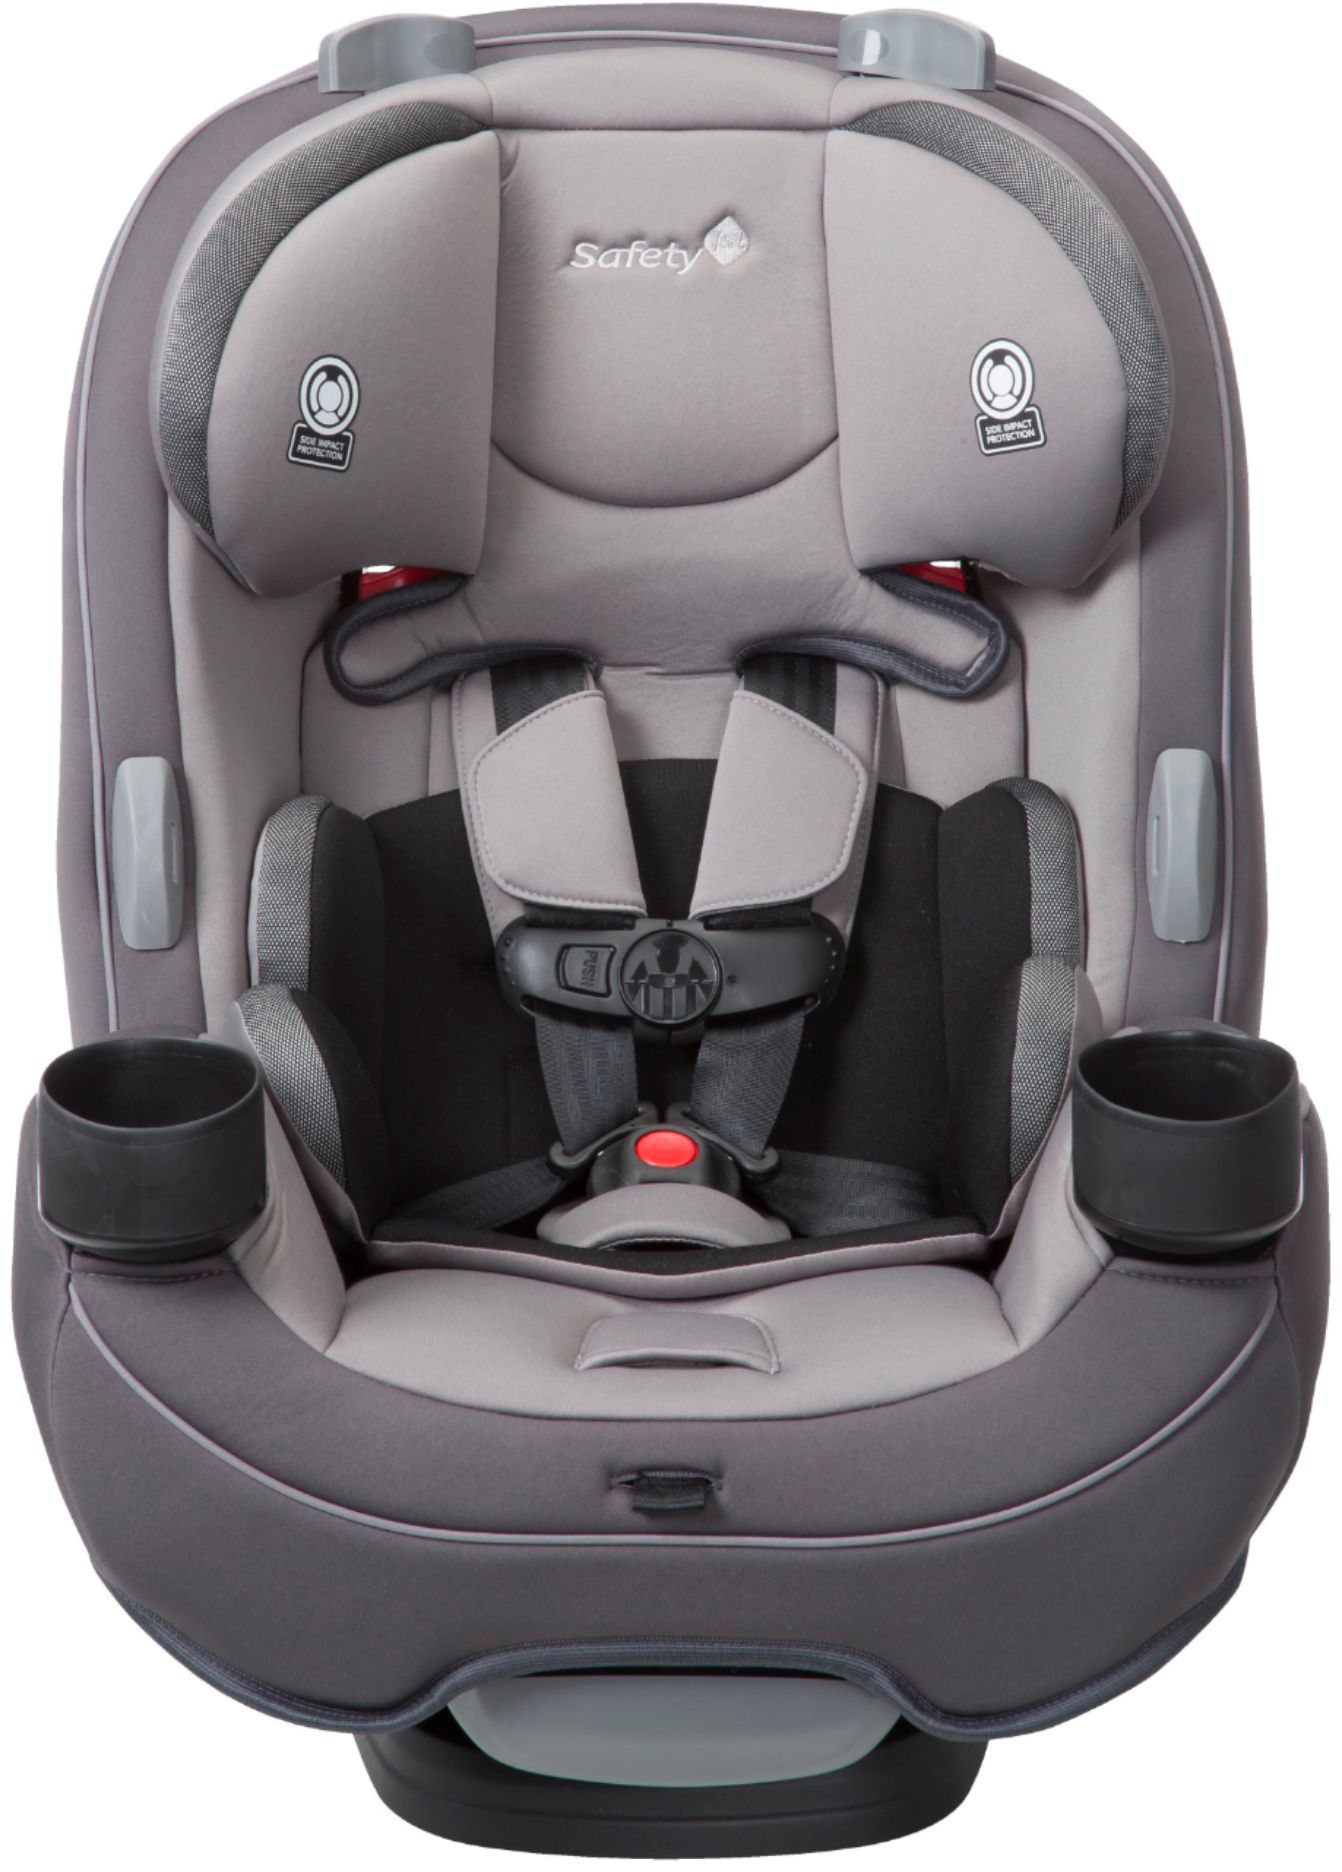 Disney Baby Grow and Go All-in-One Convertible Car Seat - Safety 1st